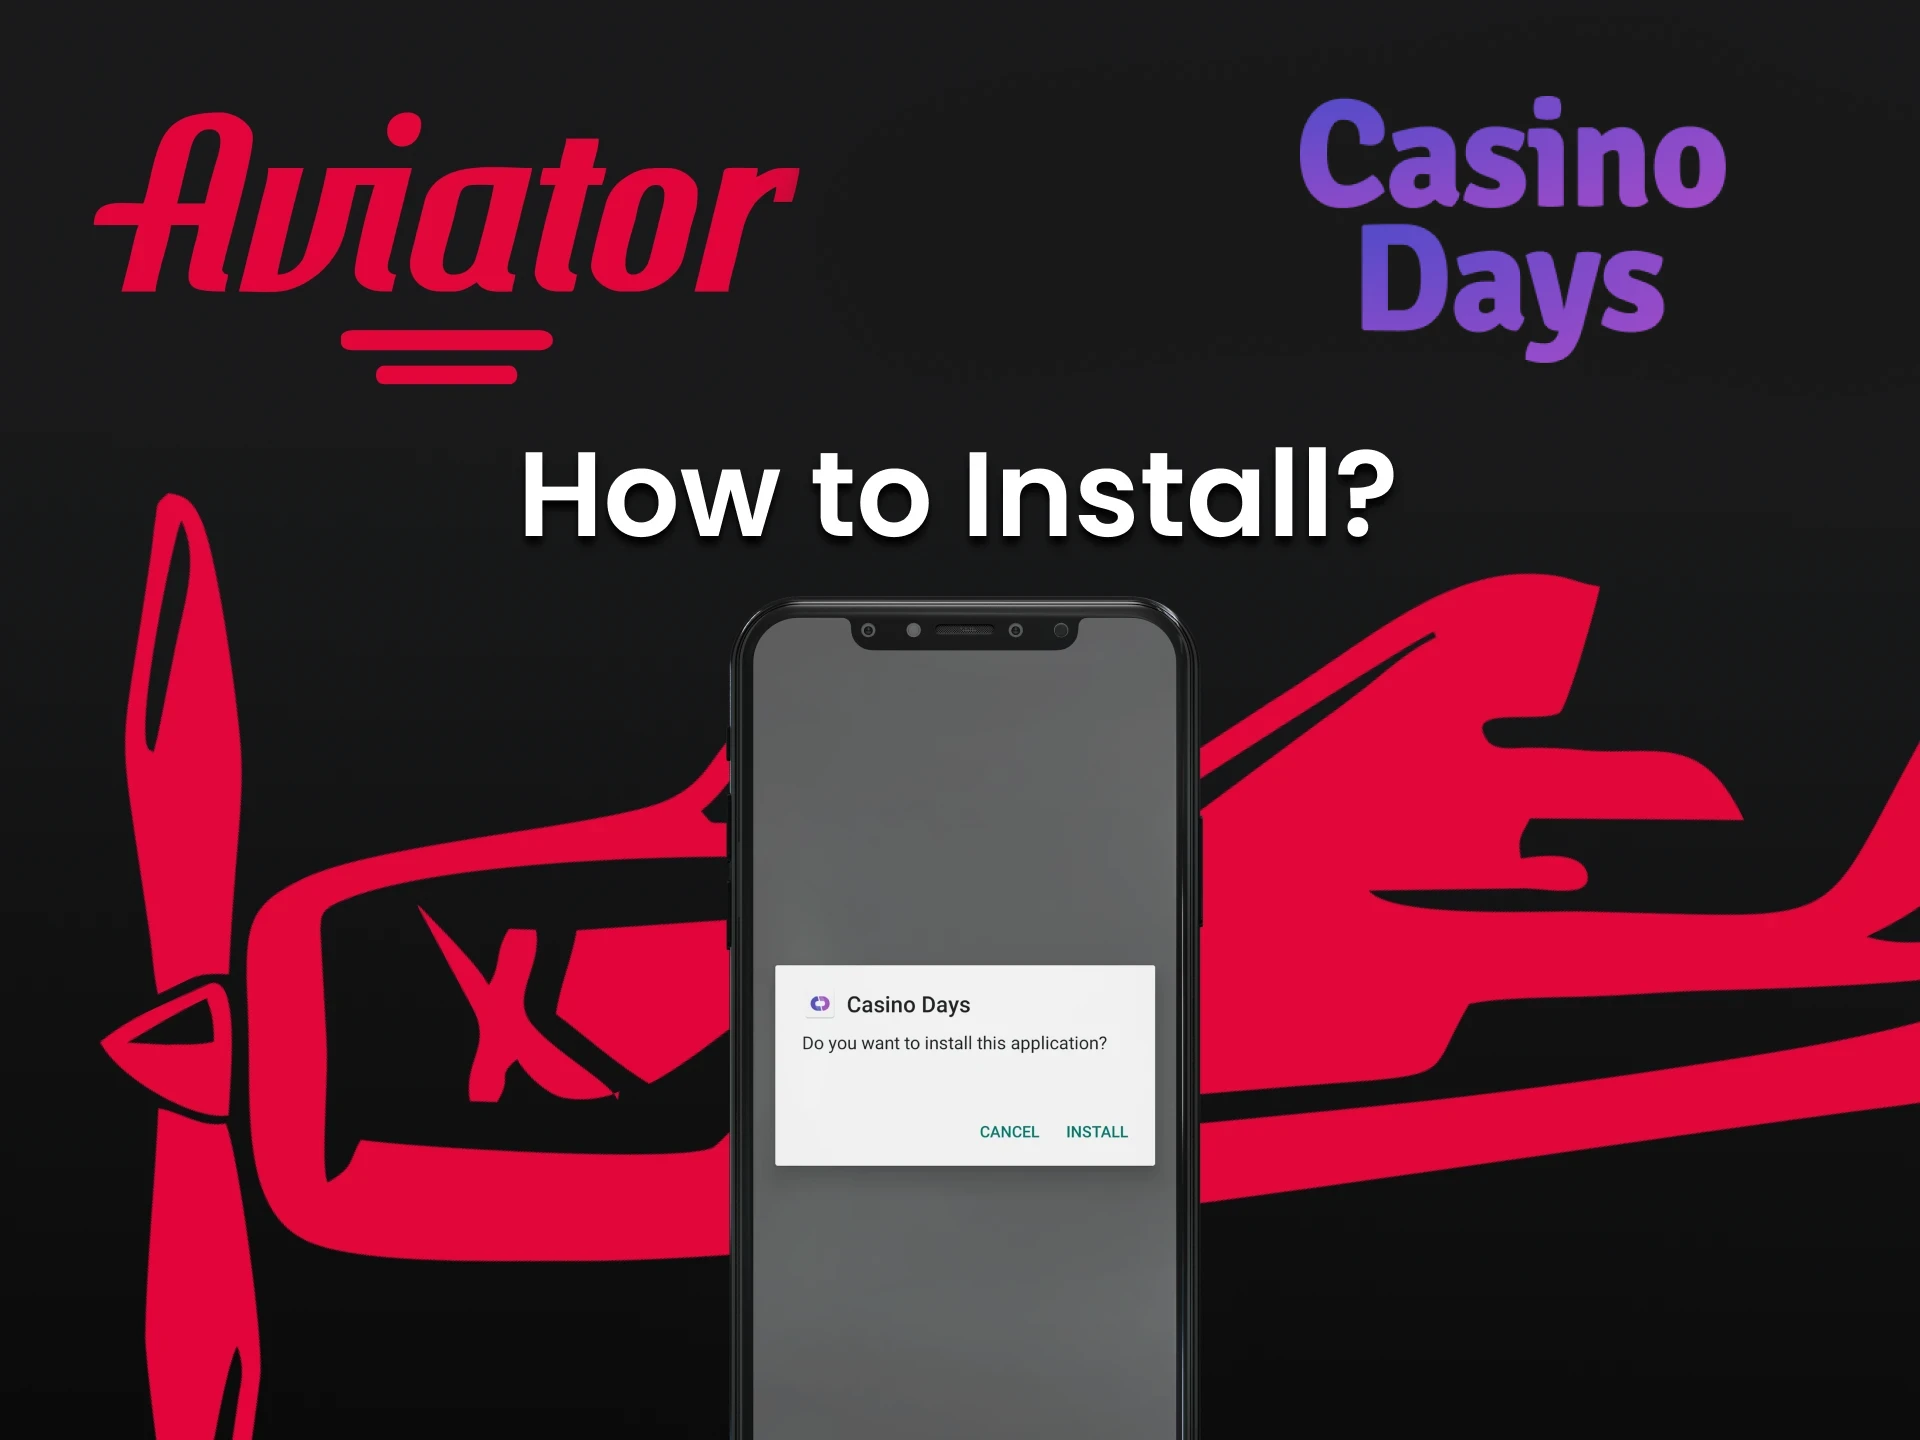 Find out how to install the Casino Days application to play Aviator.